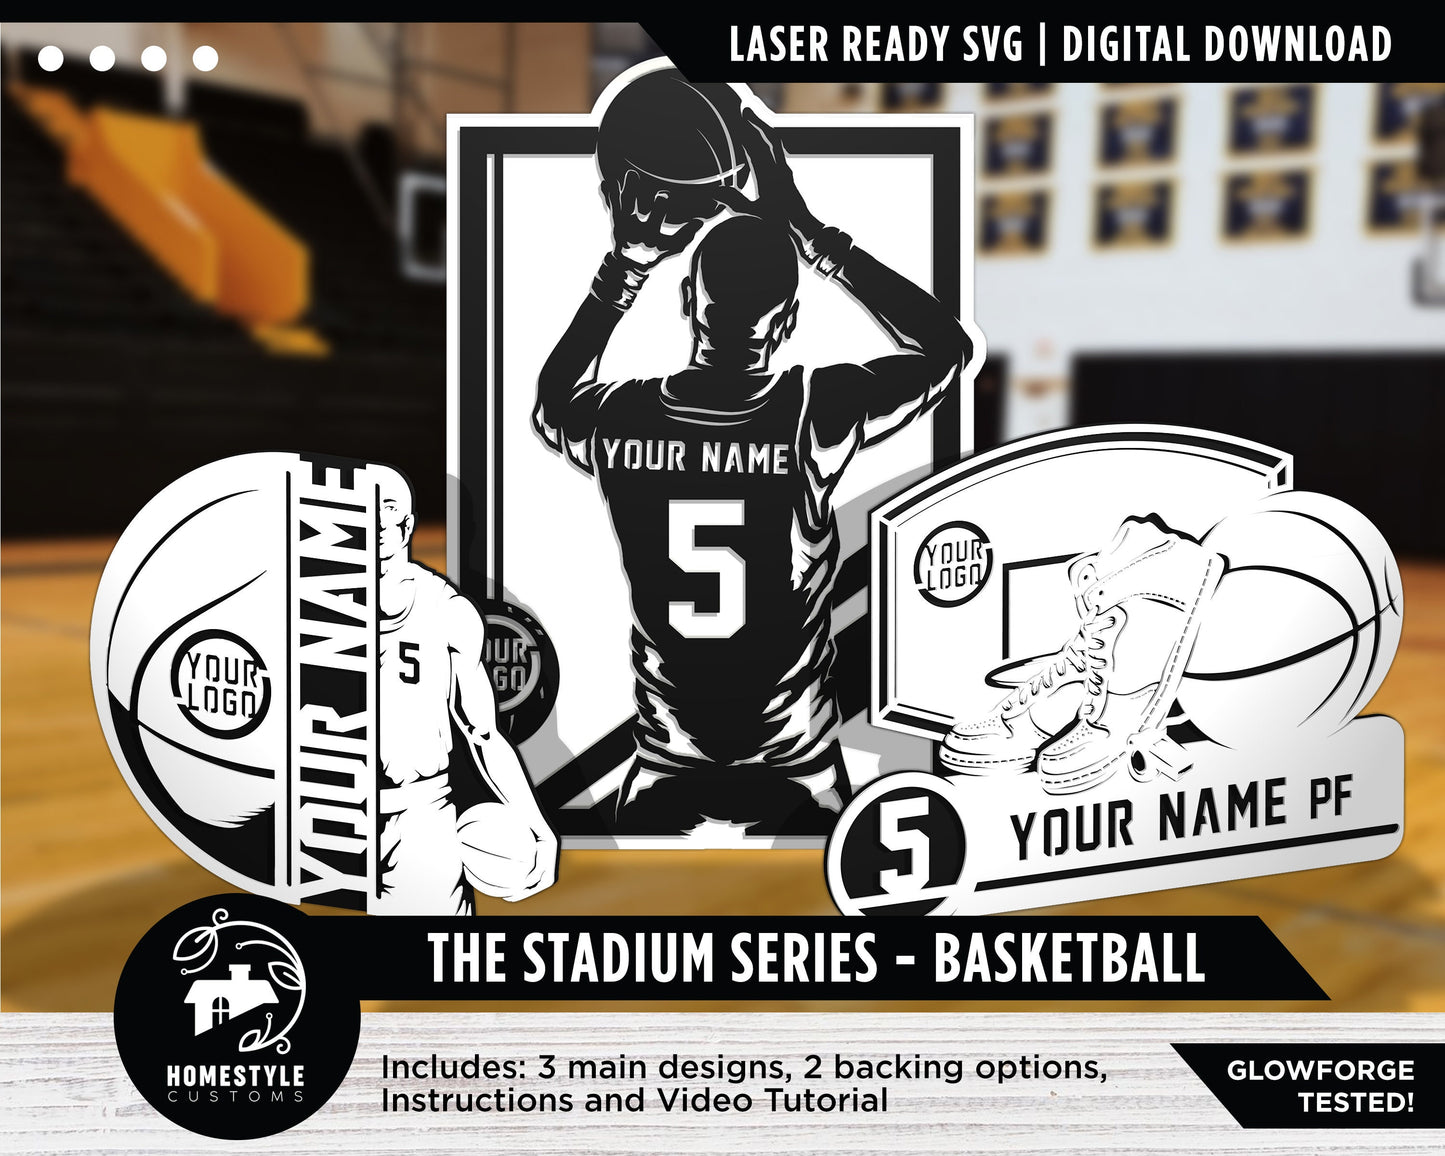 Stadium Series Basketball Signage - 3 Designs Included and two backing options - SVG File Download - Sized for Glowforge